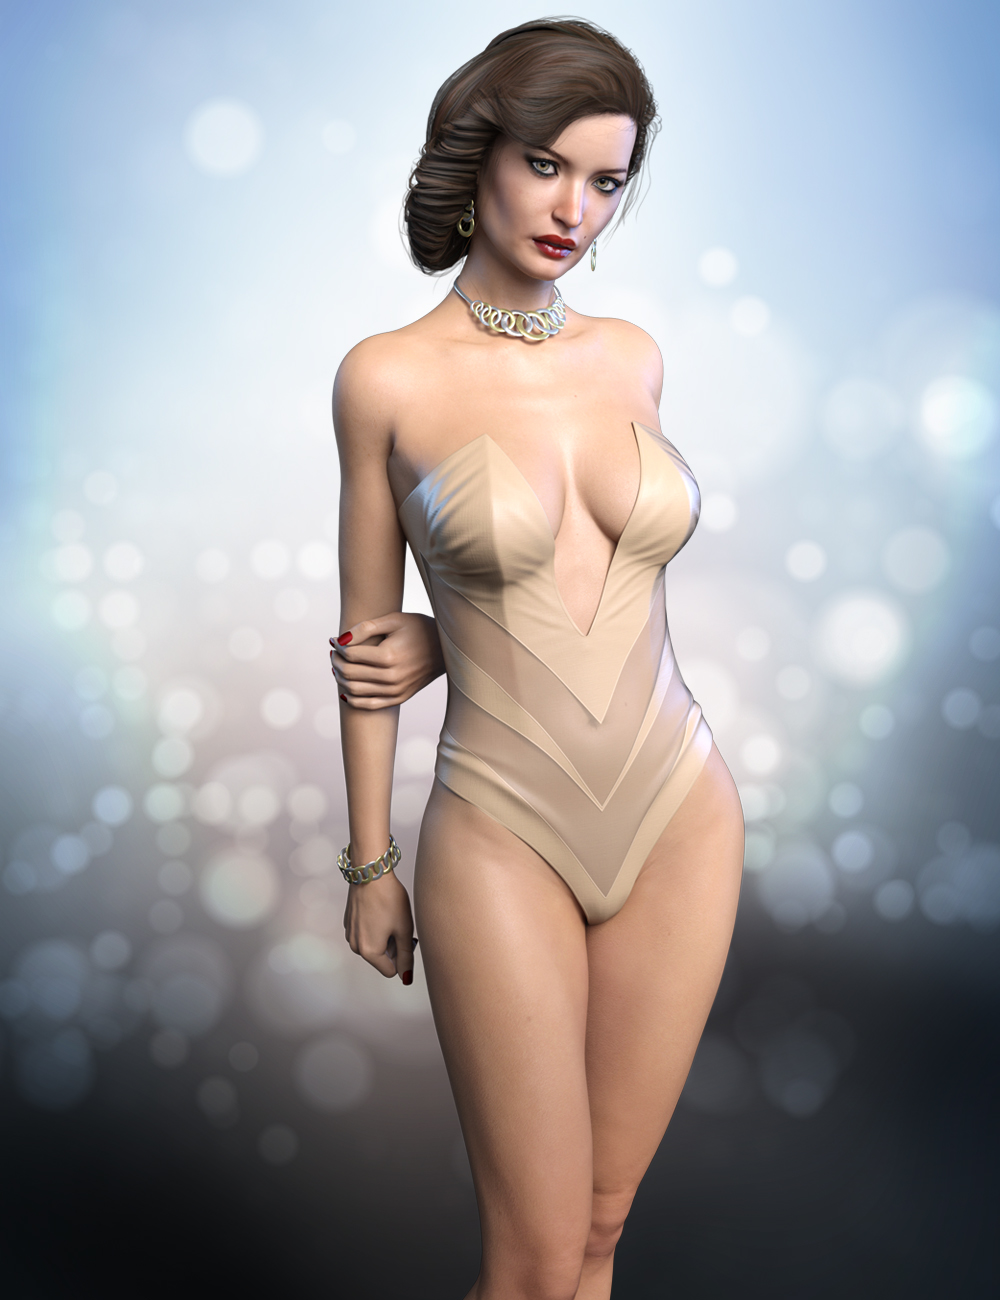 FWSA Monika HD for Victoria 7 and Her Jewelry by: Fred Winkler ArtSabbyFisty & Darc, 3D Models by Daz 3D